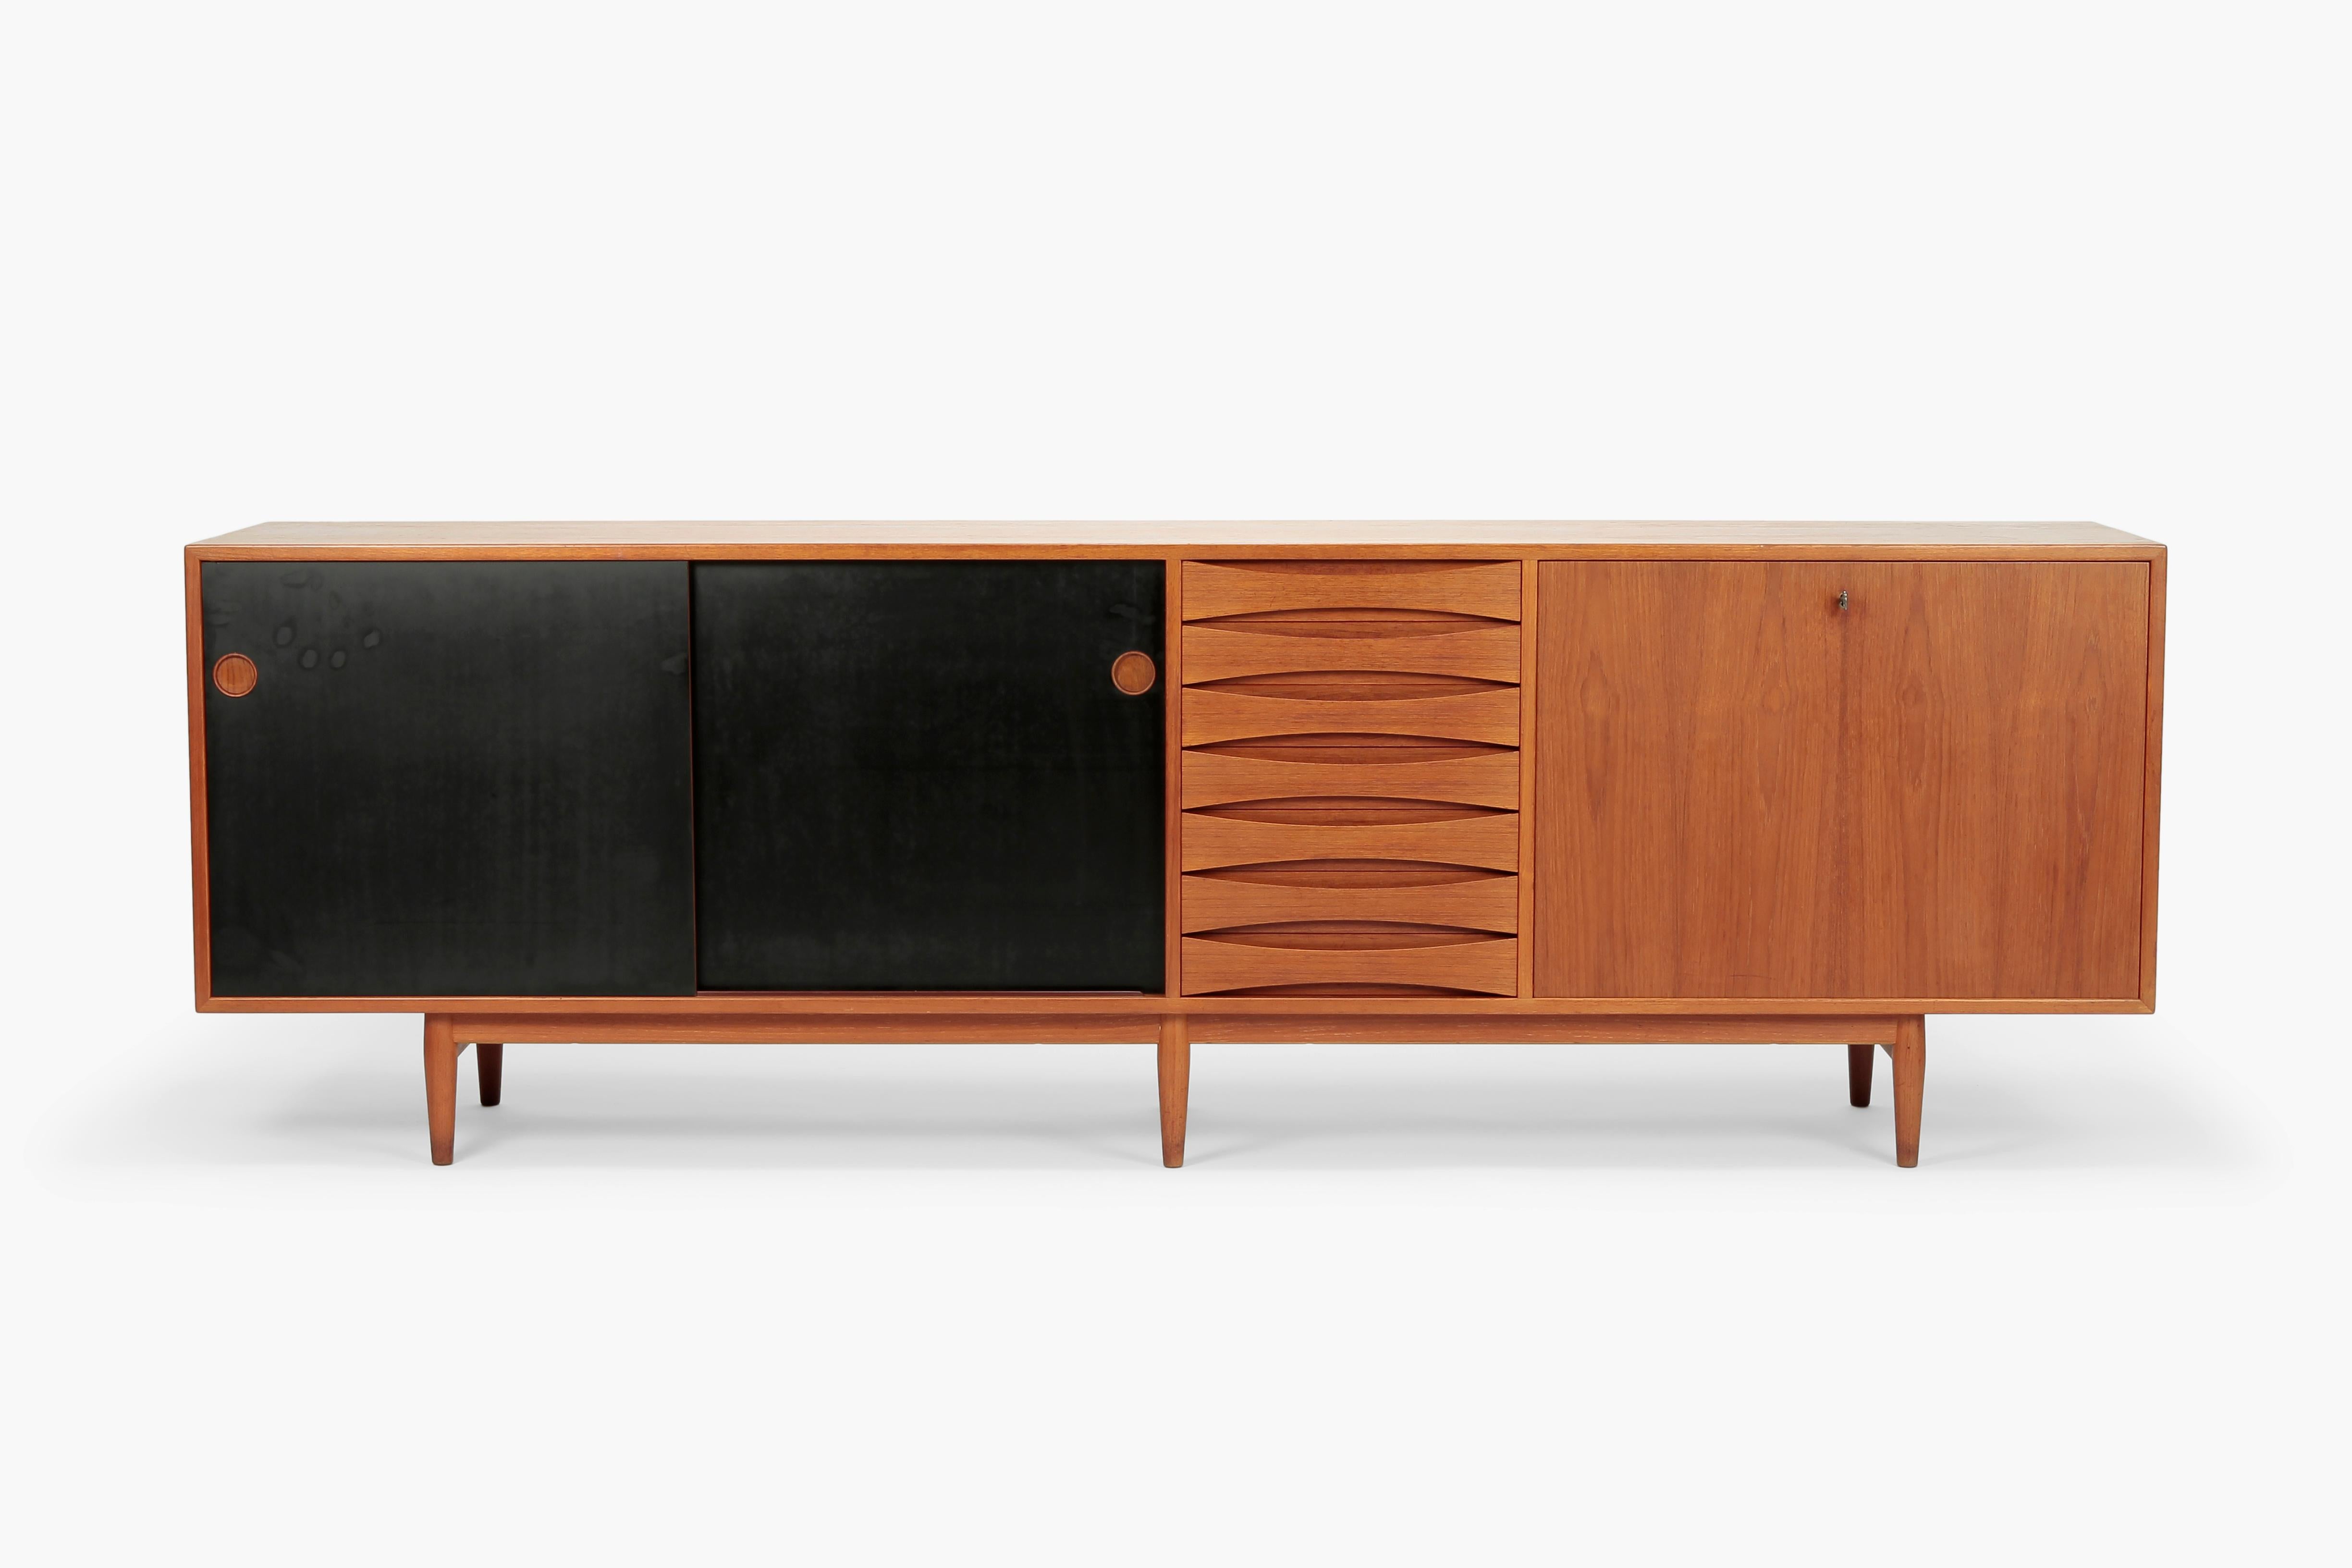 Huge Arne Vodder sideboard Triennale Model 29A was designed in 1959 for the Milan Triennale and manufactured by Sibast in the 1960s. Made of partly solid, partly veneered teak with reversible doors, one side black coated, the other teak surface. The